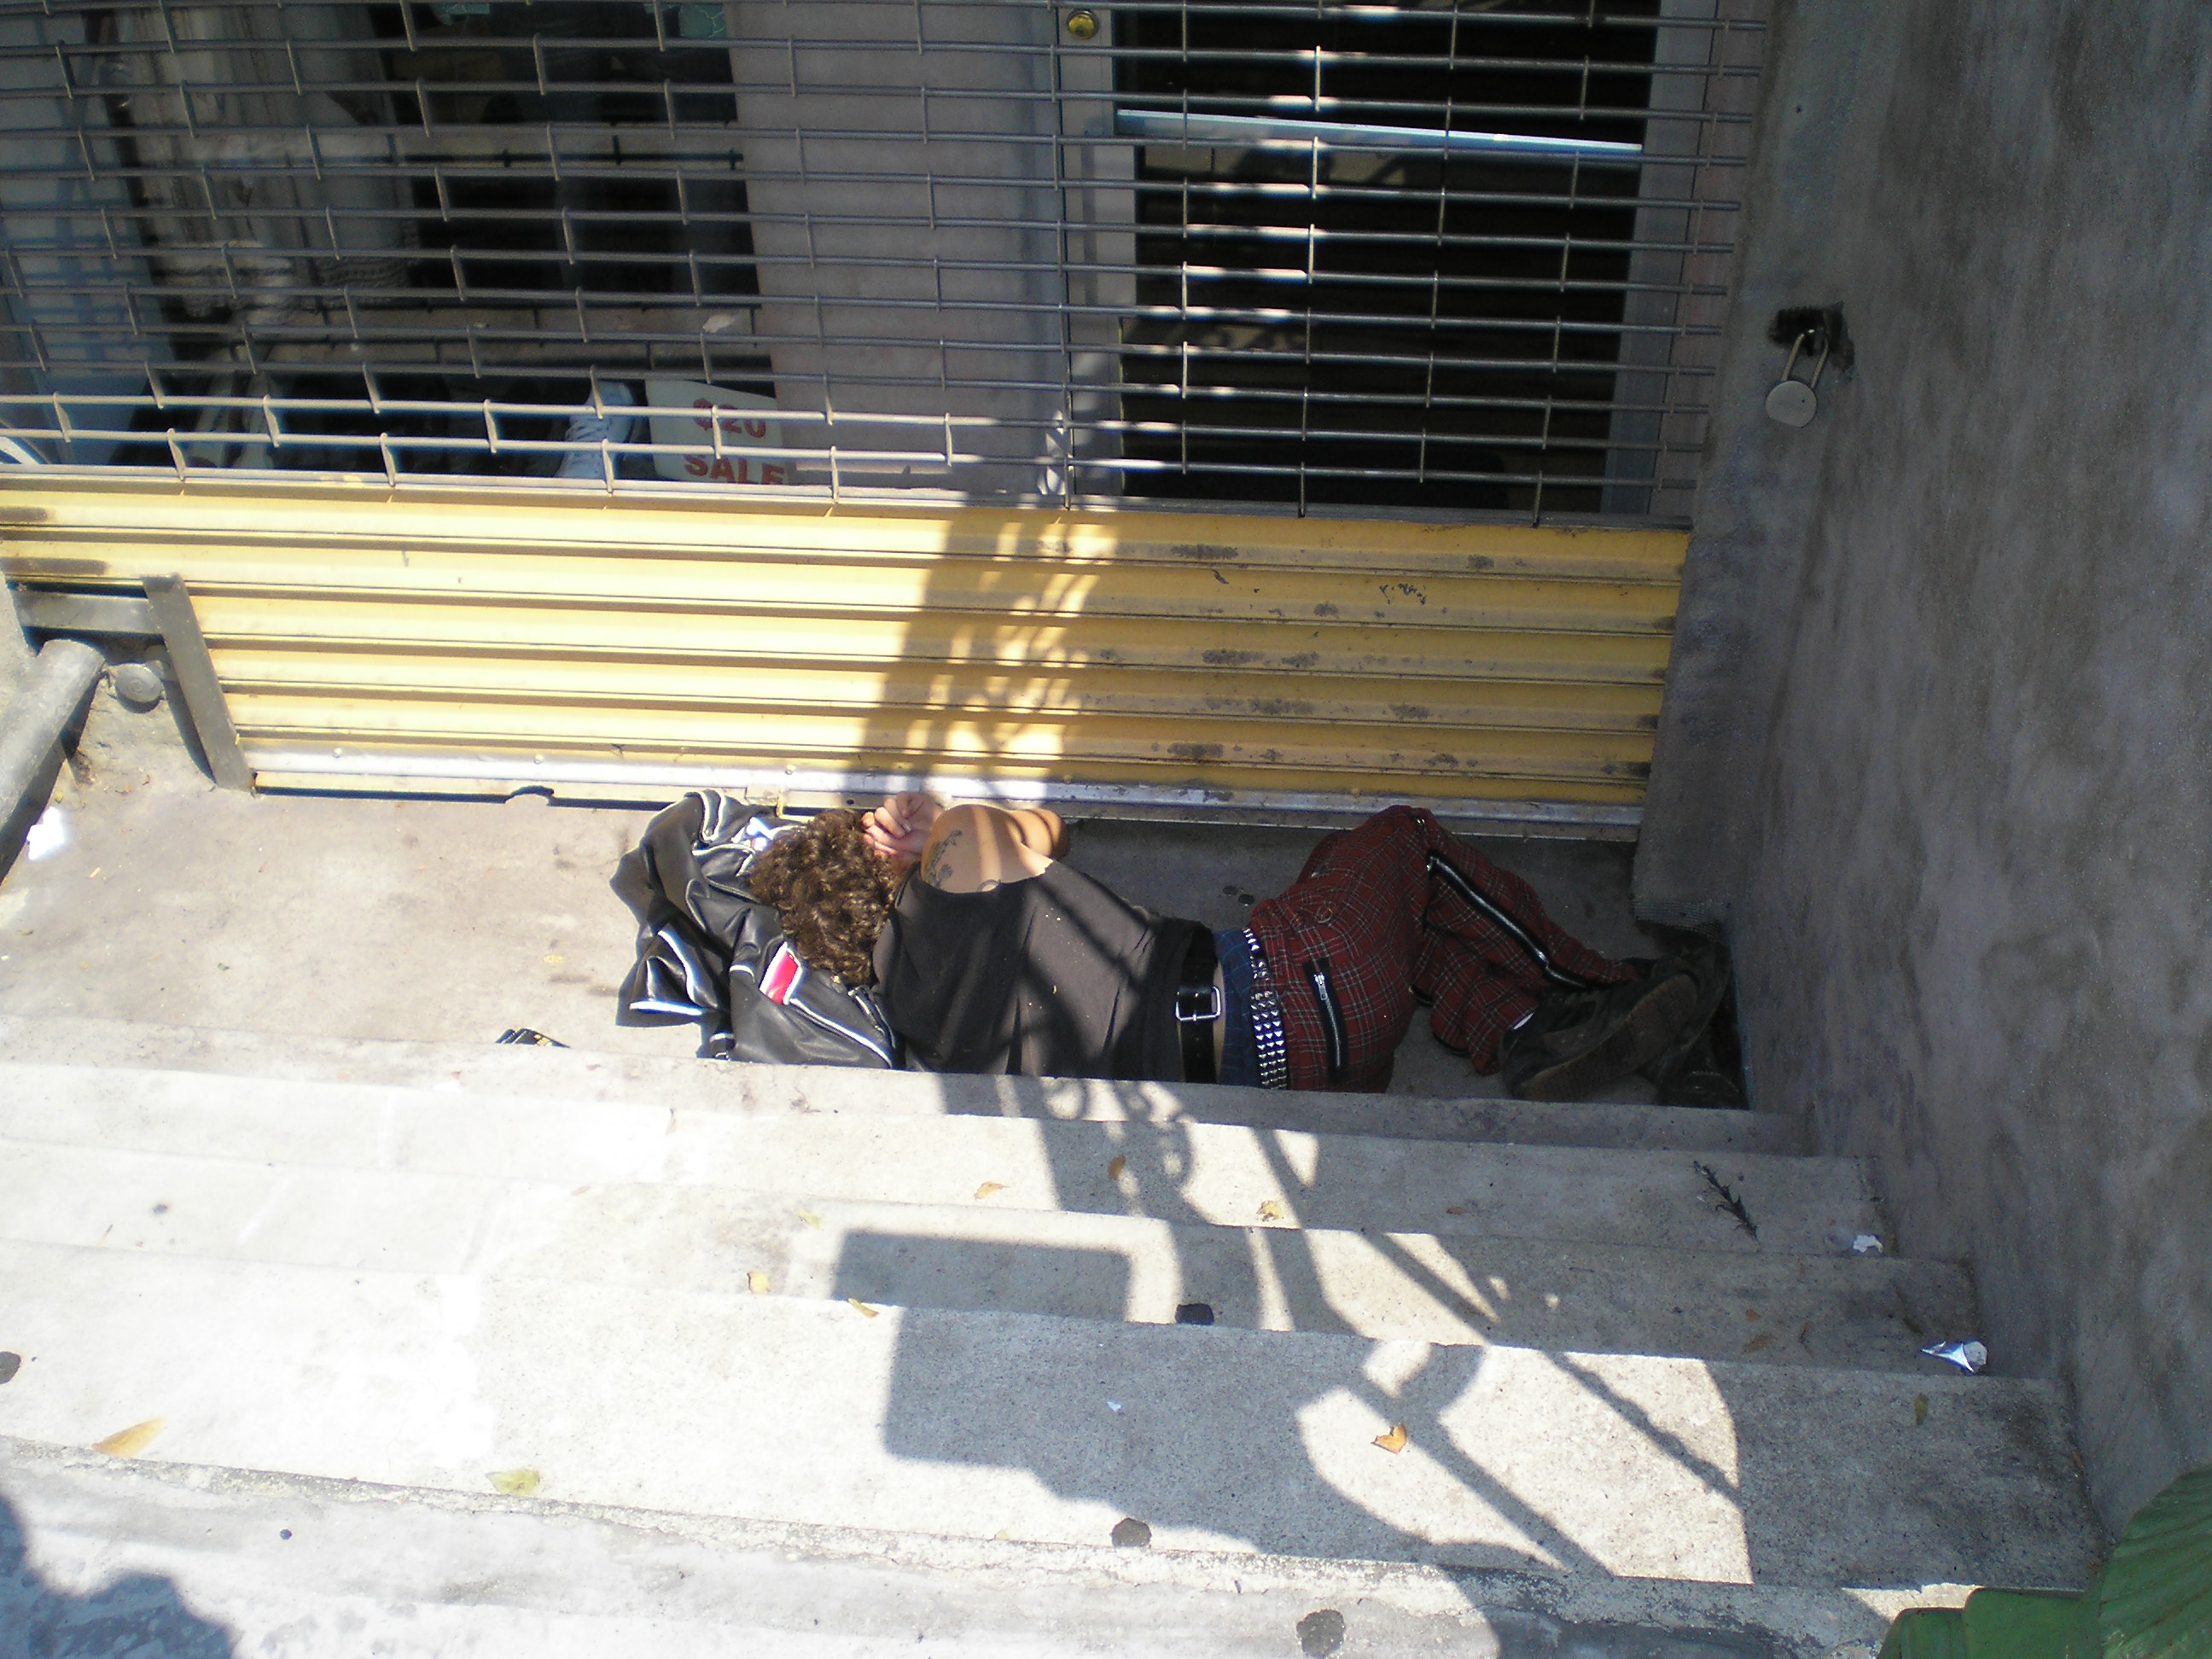 A homeless man in the East Village, New York City